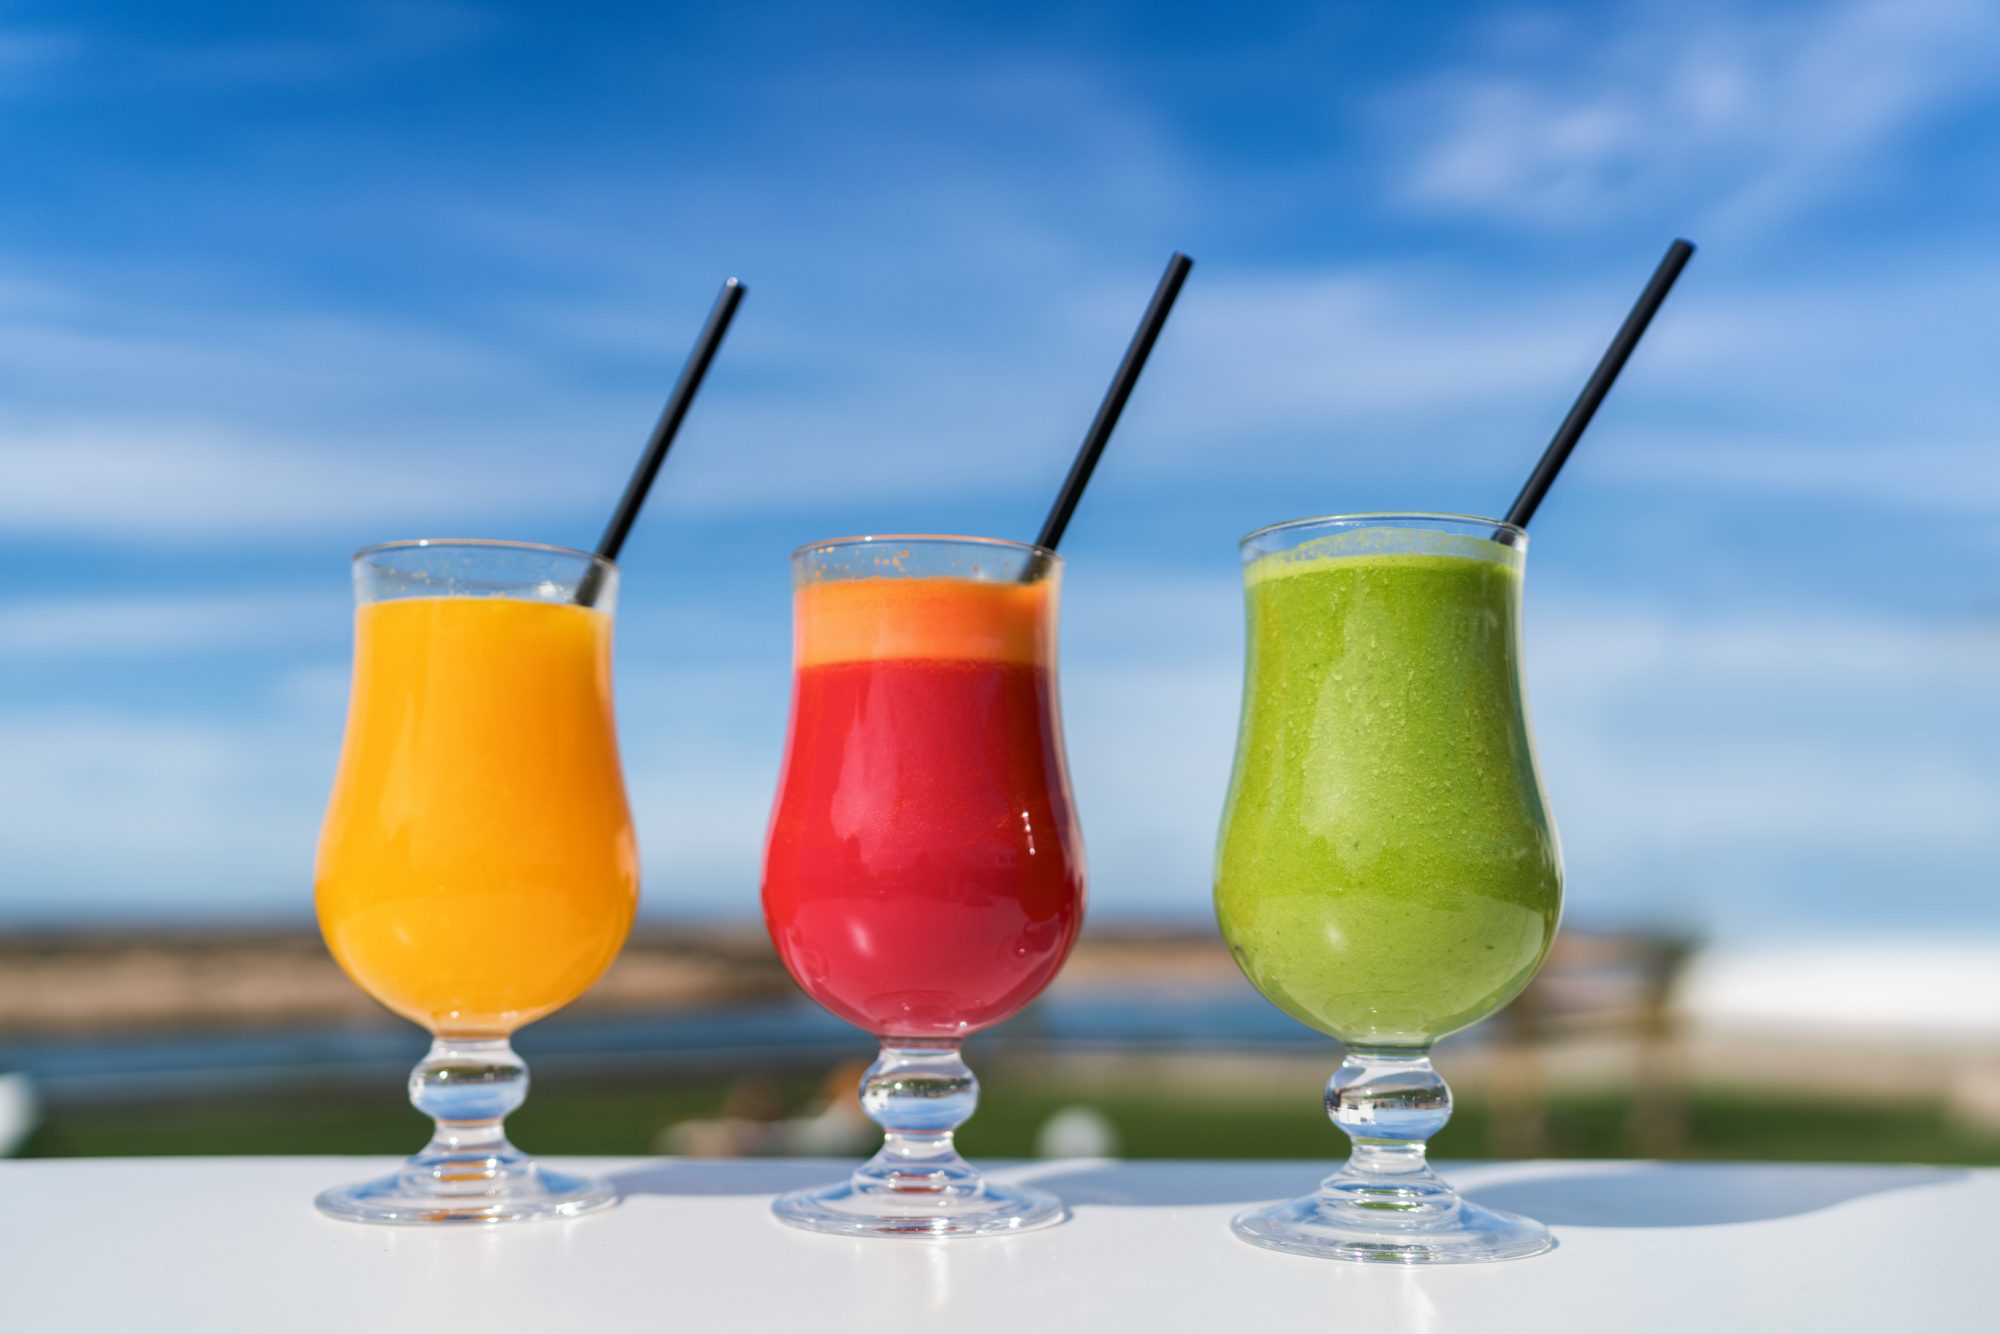 Healthy eating juicing cleanse diet trend concept - fruit and vegetable juice glasses on outdoor cafe table. Green smoothie or cold-pressed juices. Orange, beet and spinach green smoothie cups.